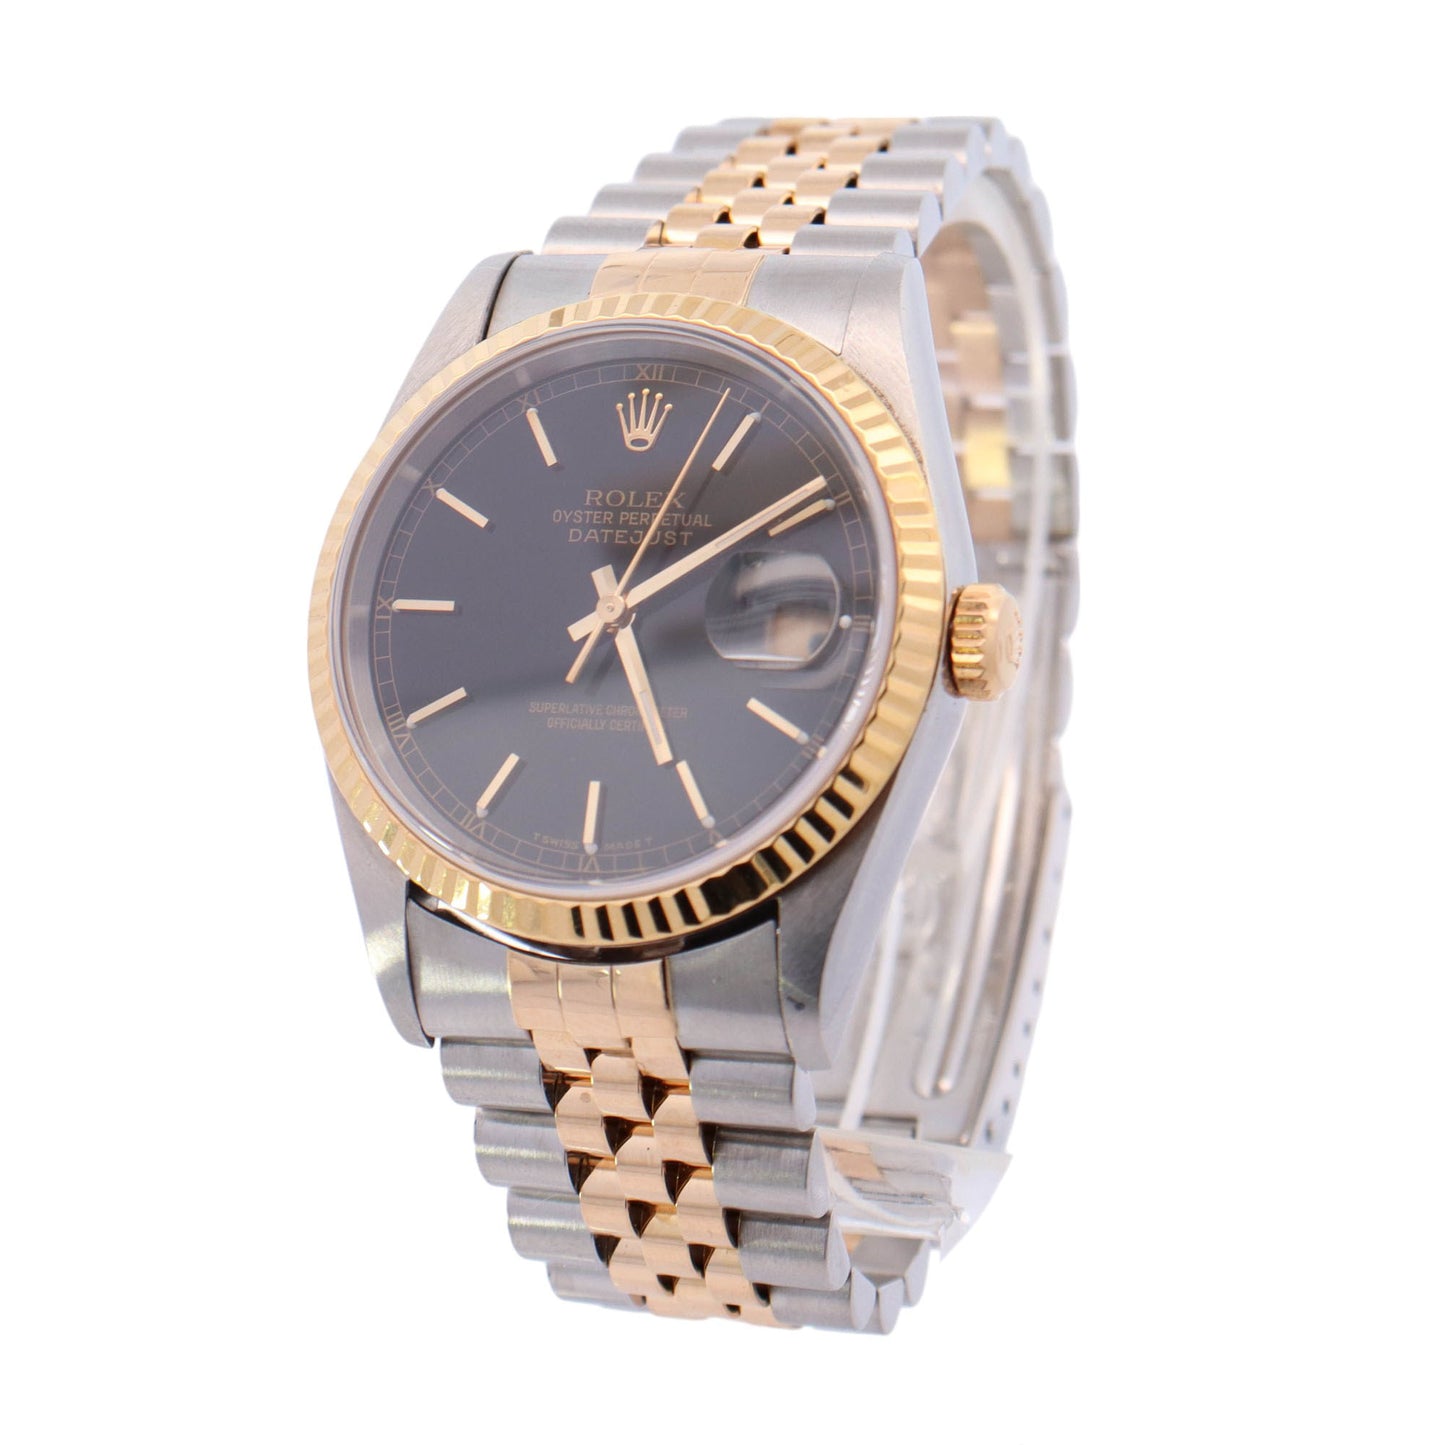 Rolex Datejust Two Tone Stainless Steel & Yellow Gold 36mm Black Stick Dial Watch Reference #: 16233 - Happy Jewelers Fine Jewelry Lifetime Warranty